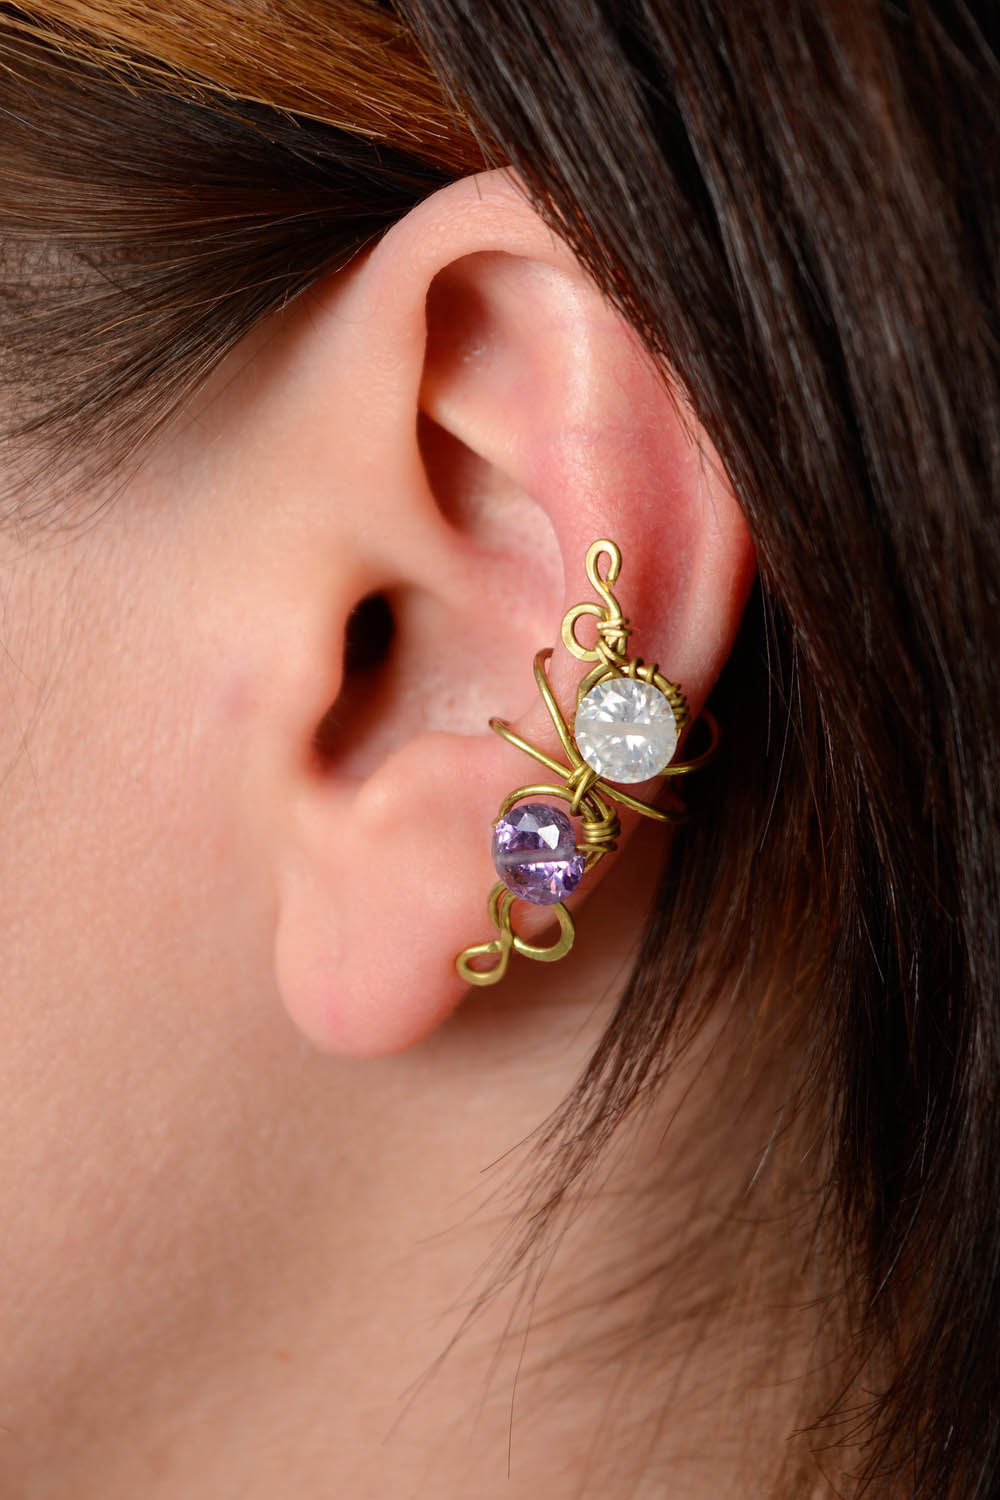 Middle inner ear cuff with crystals photo 5